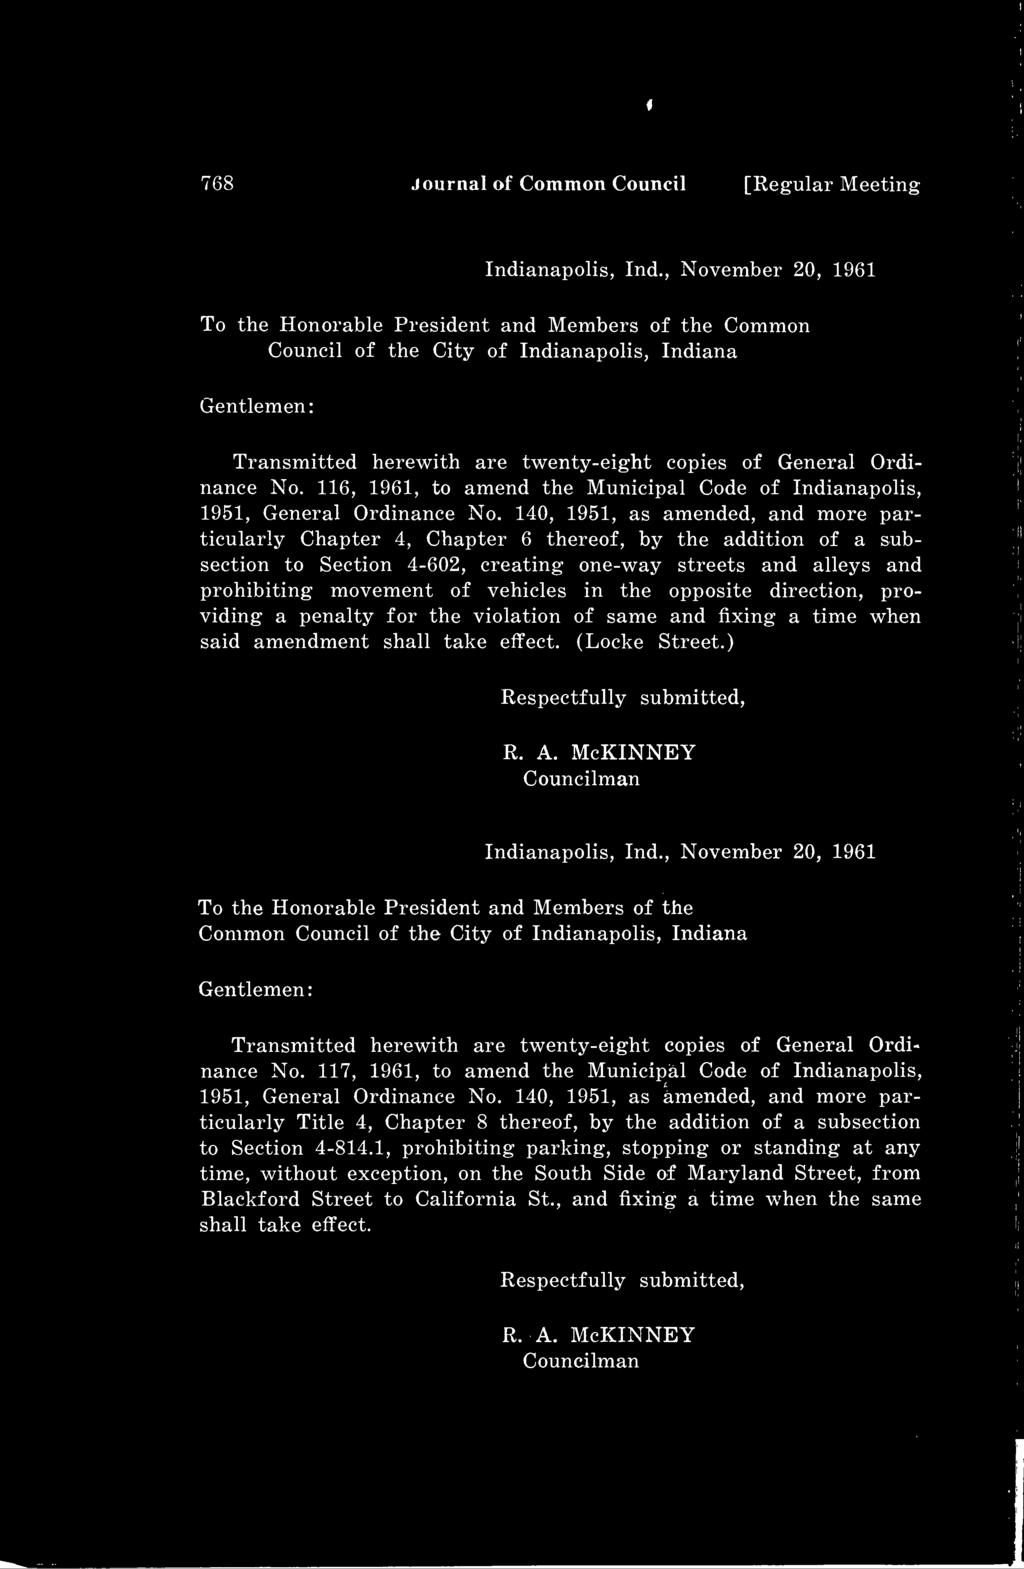 768 Journal of Common Council [Regular Meeting To the Honorable President and Members of the Common Council of the City of Indianapolis, Indiana Transmitted herewith are twenty-eight copies of